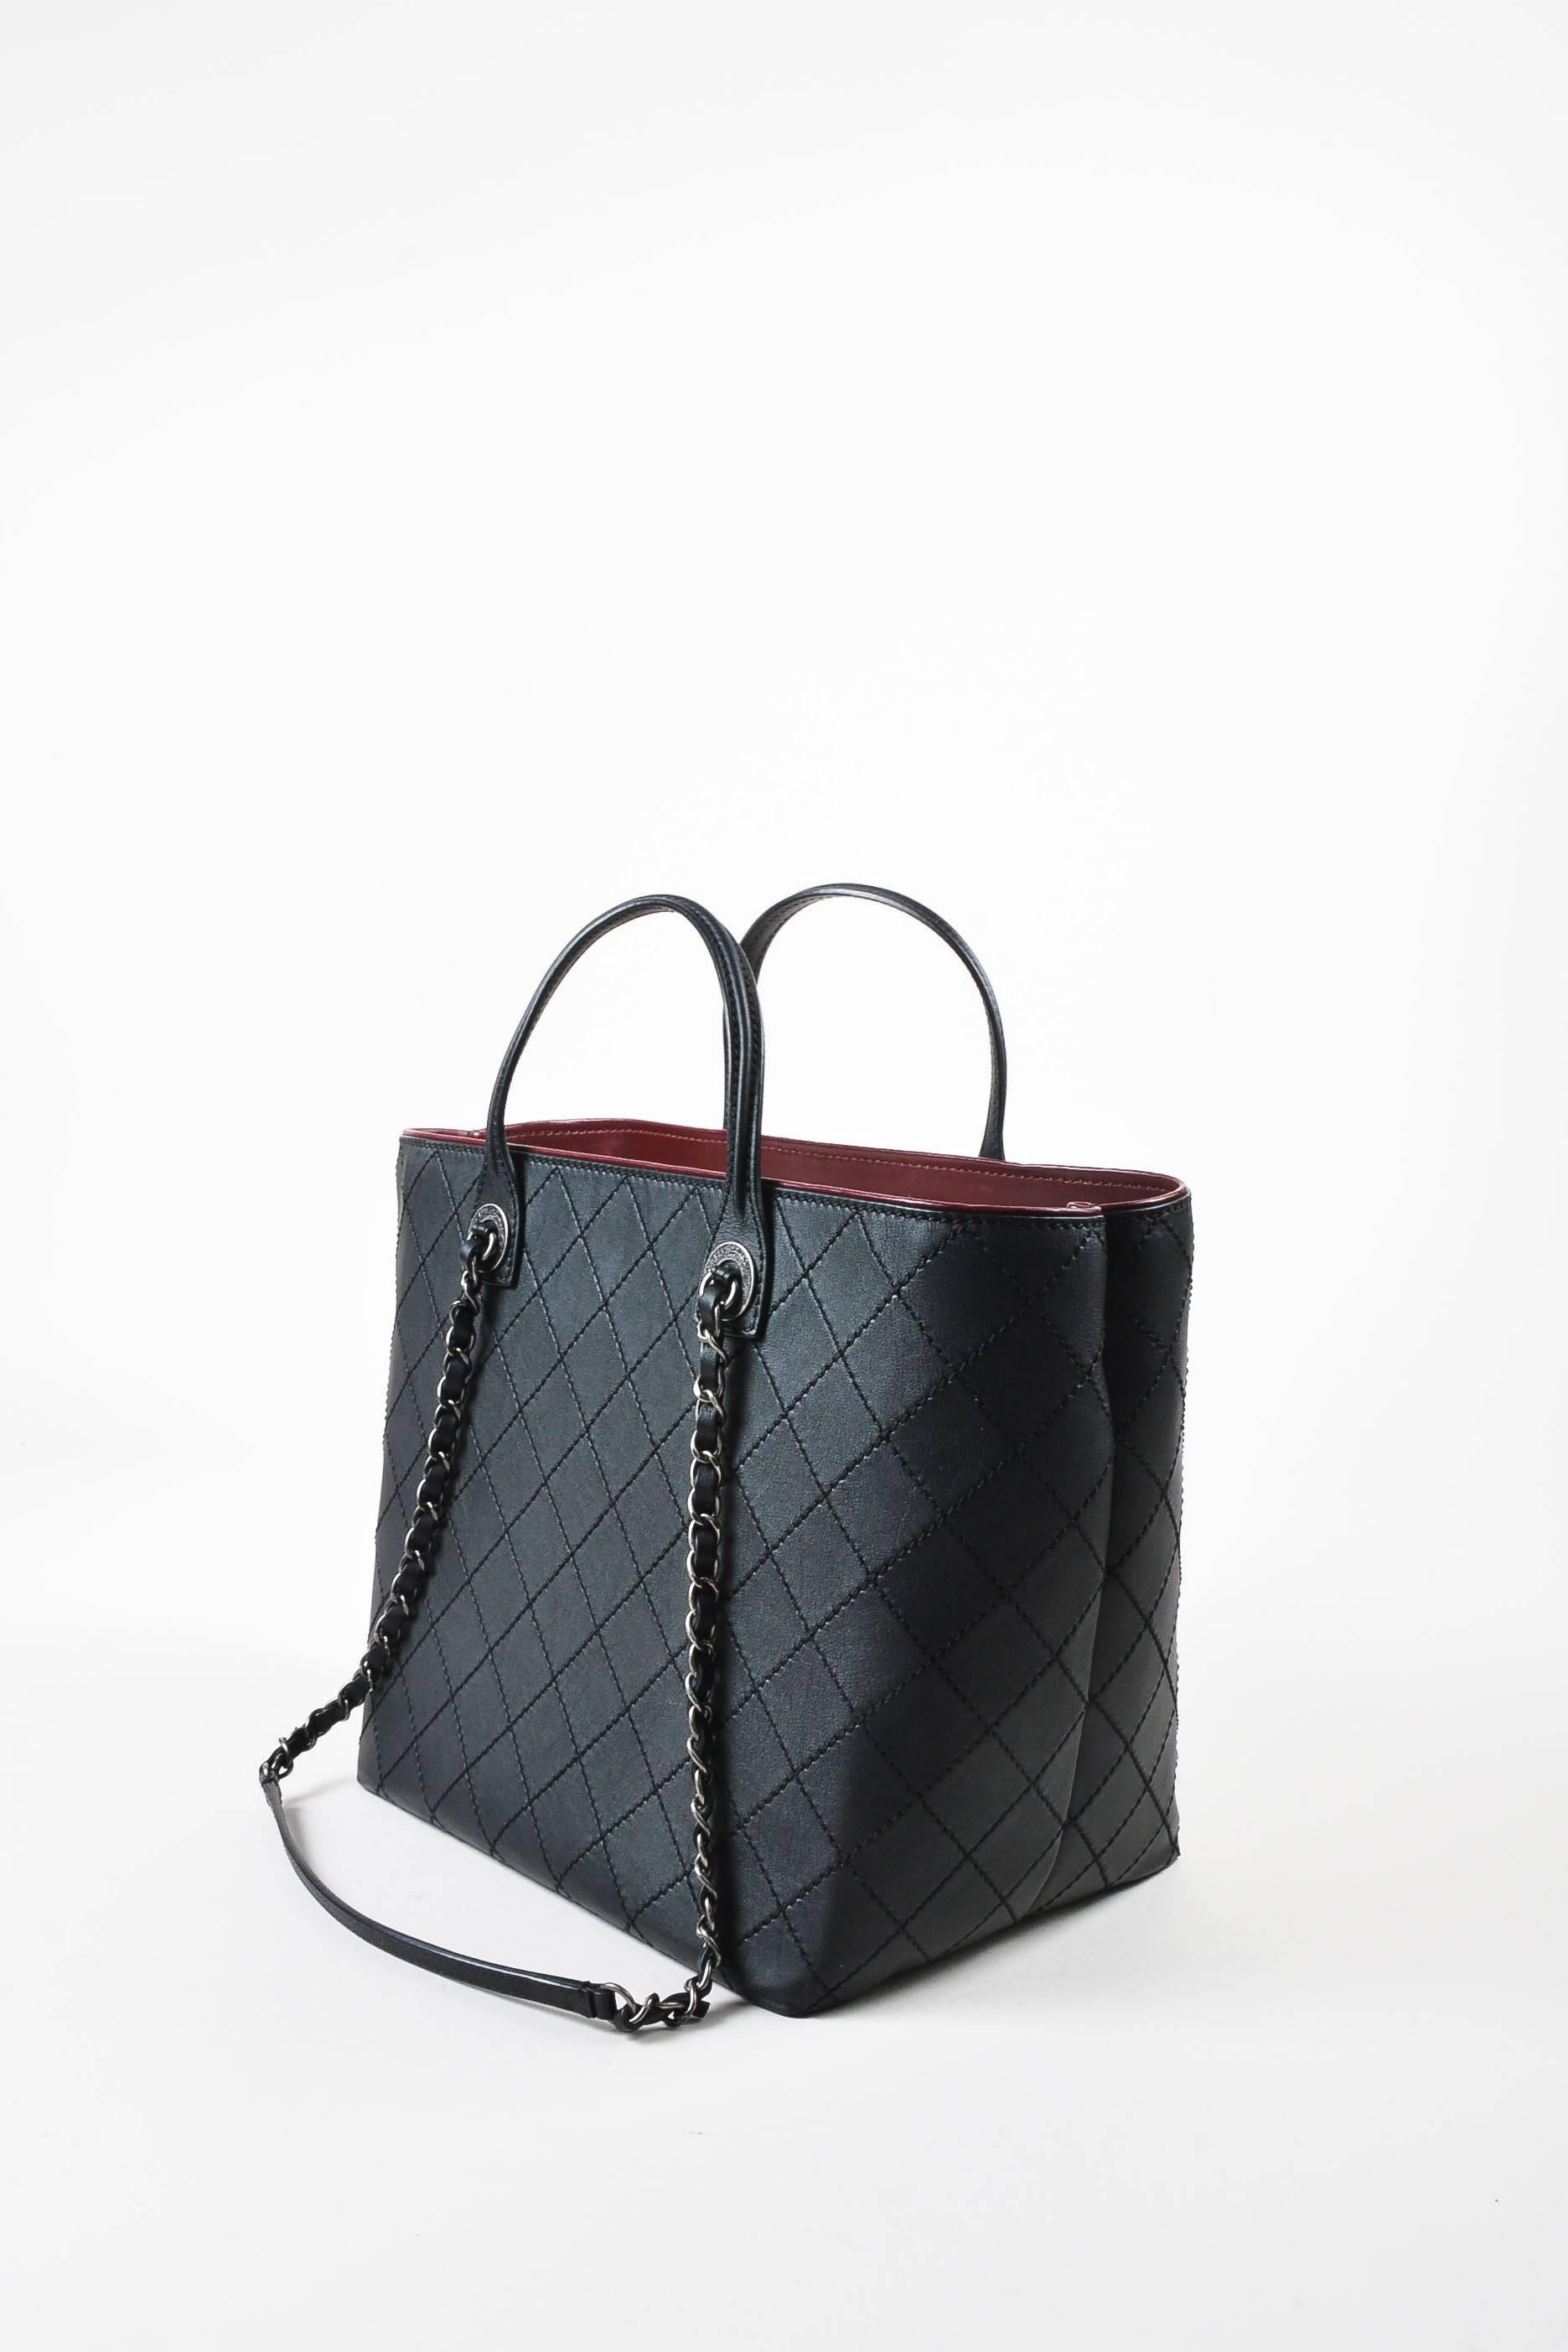 Retails at $3800. Supple, smooth black leather shopping tote bag from Chanel's 2016 Cruise Collection. Signature diamond quilted stitching throughout. Bag can be worn on hand with the two top handles or on shoulder with the longer chain straps.